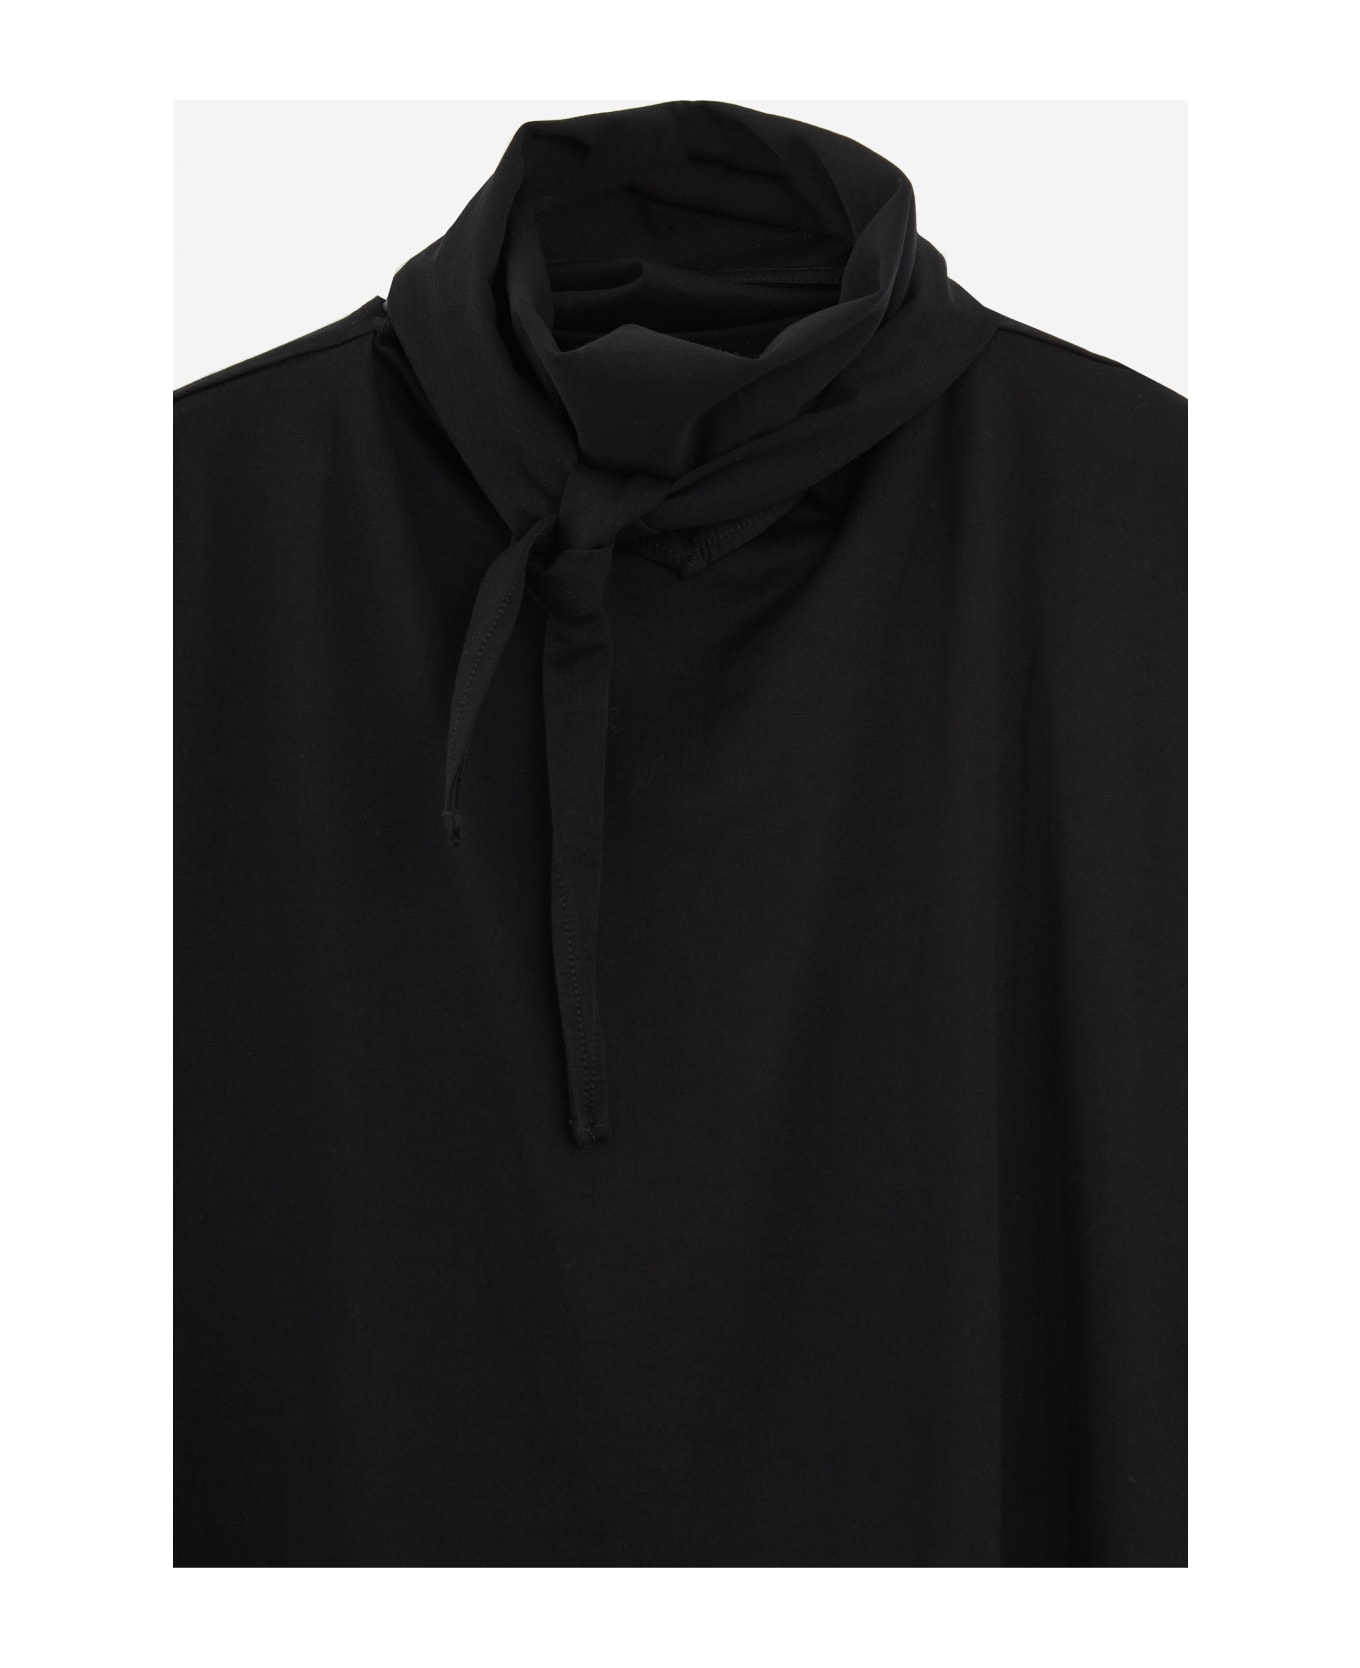 Lemaire T-shirt With Foulard T-shirt - black ポロシャツ